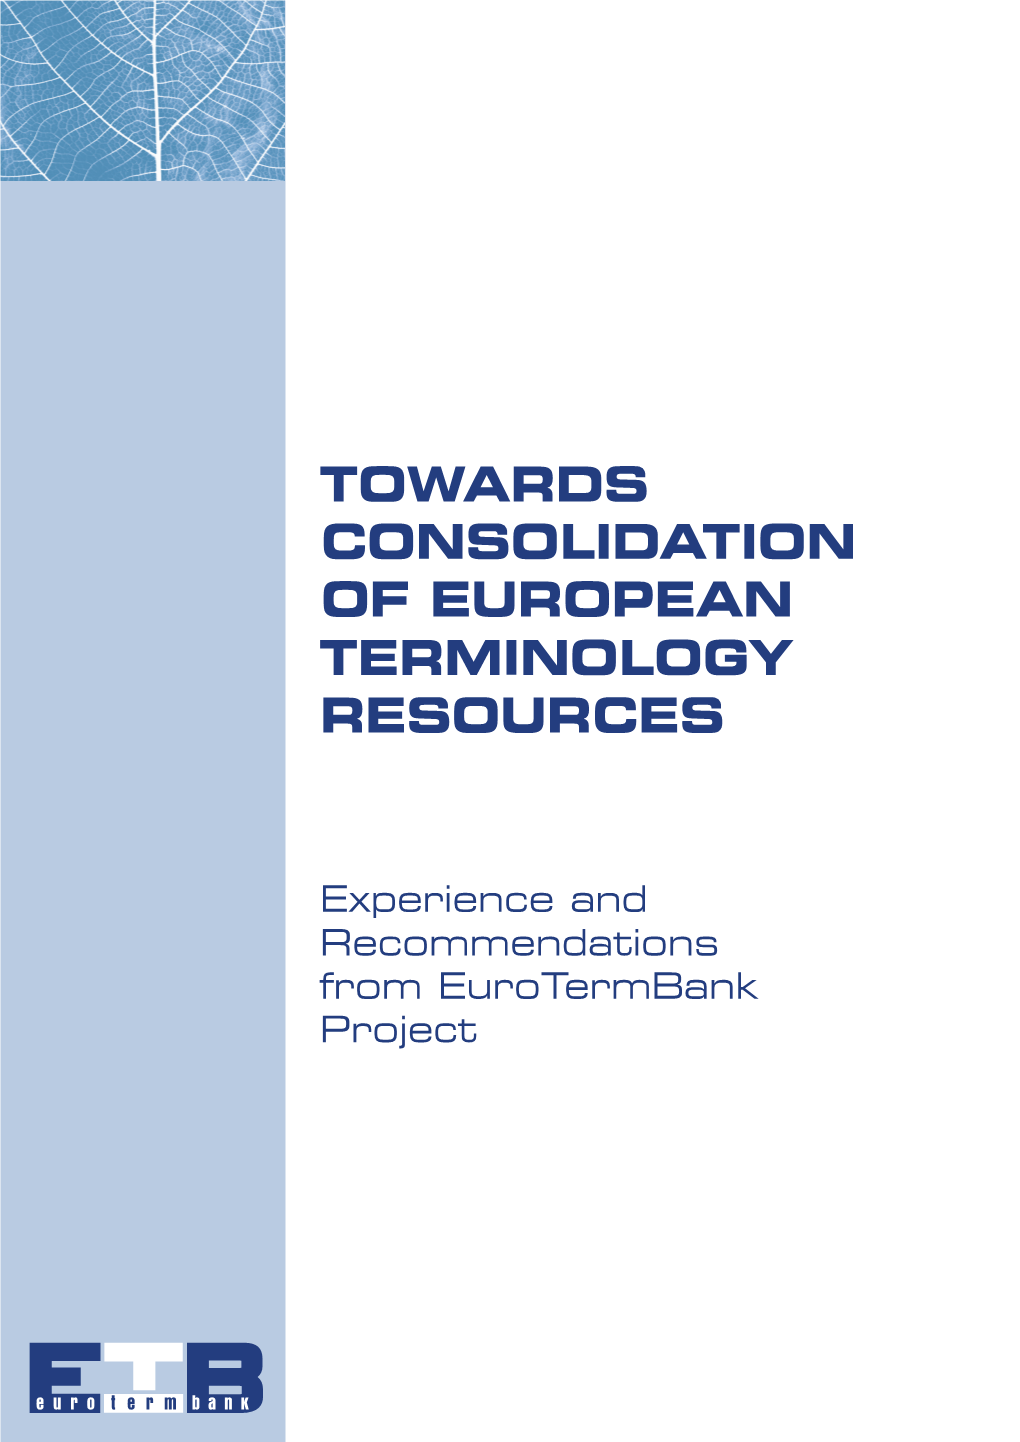 Towards Consolidation of European Terminology Resources